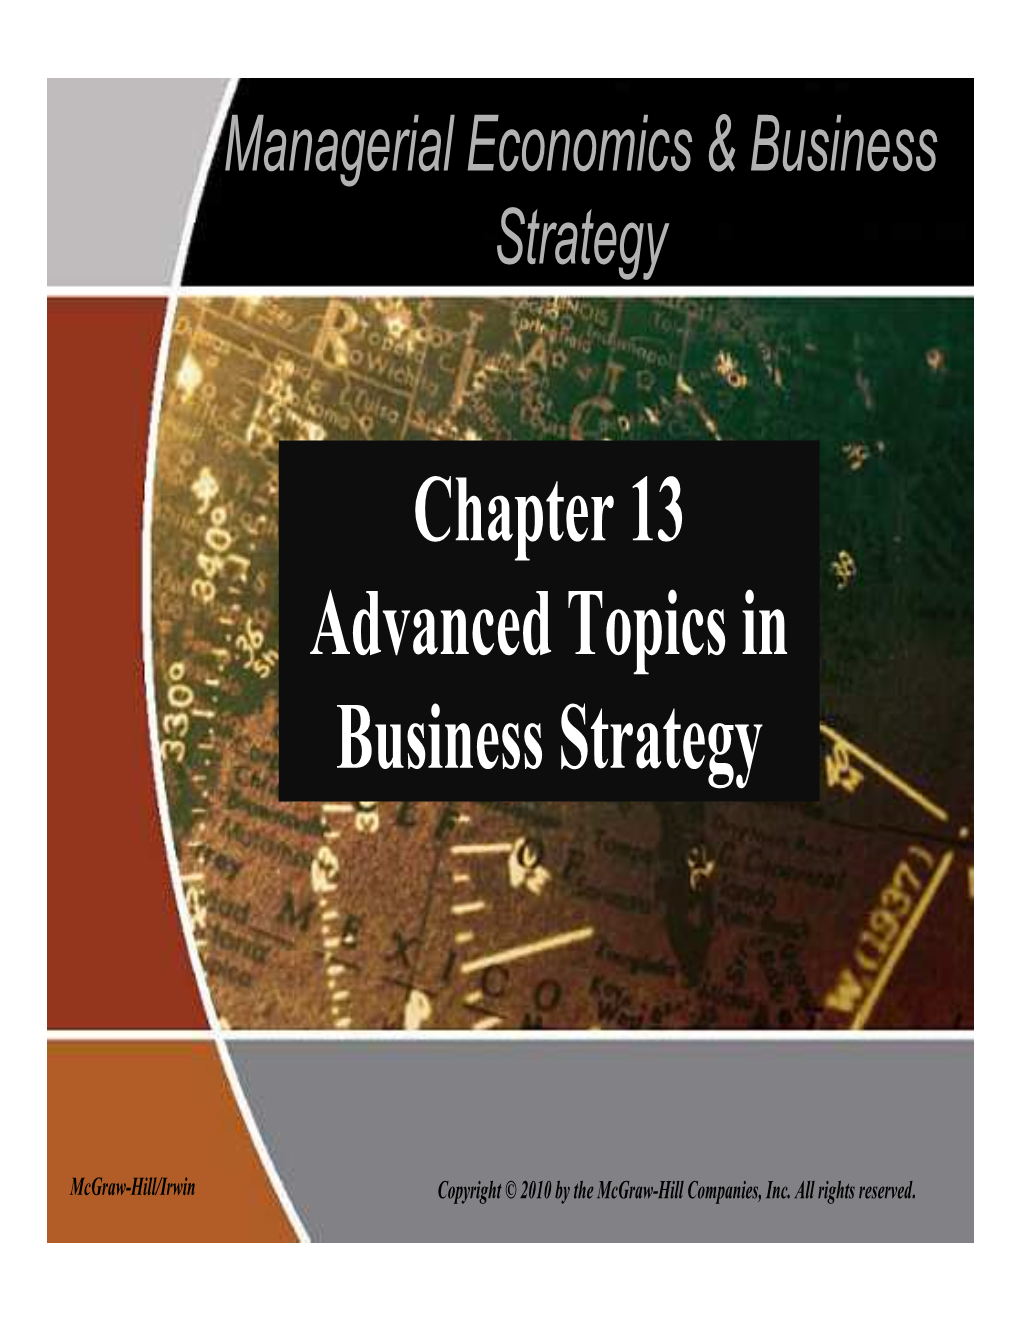 Chapter 13 Advanced Topics in Business Strategy